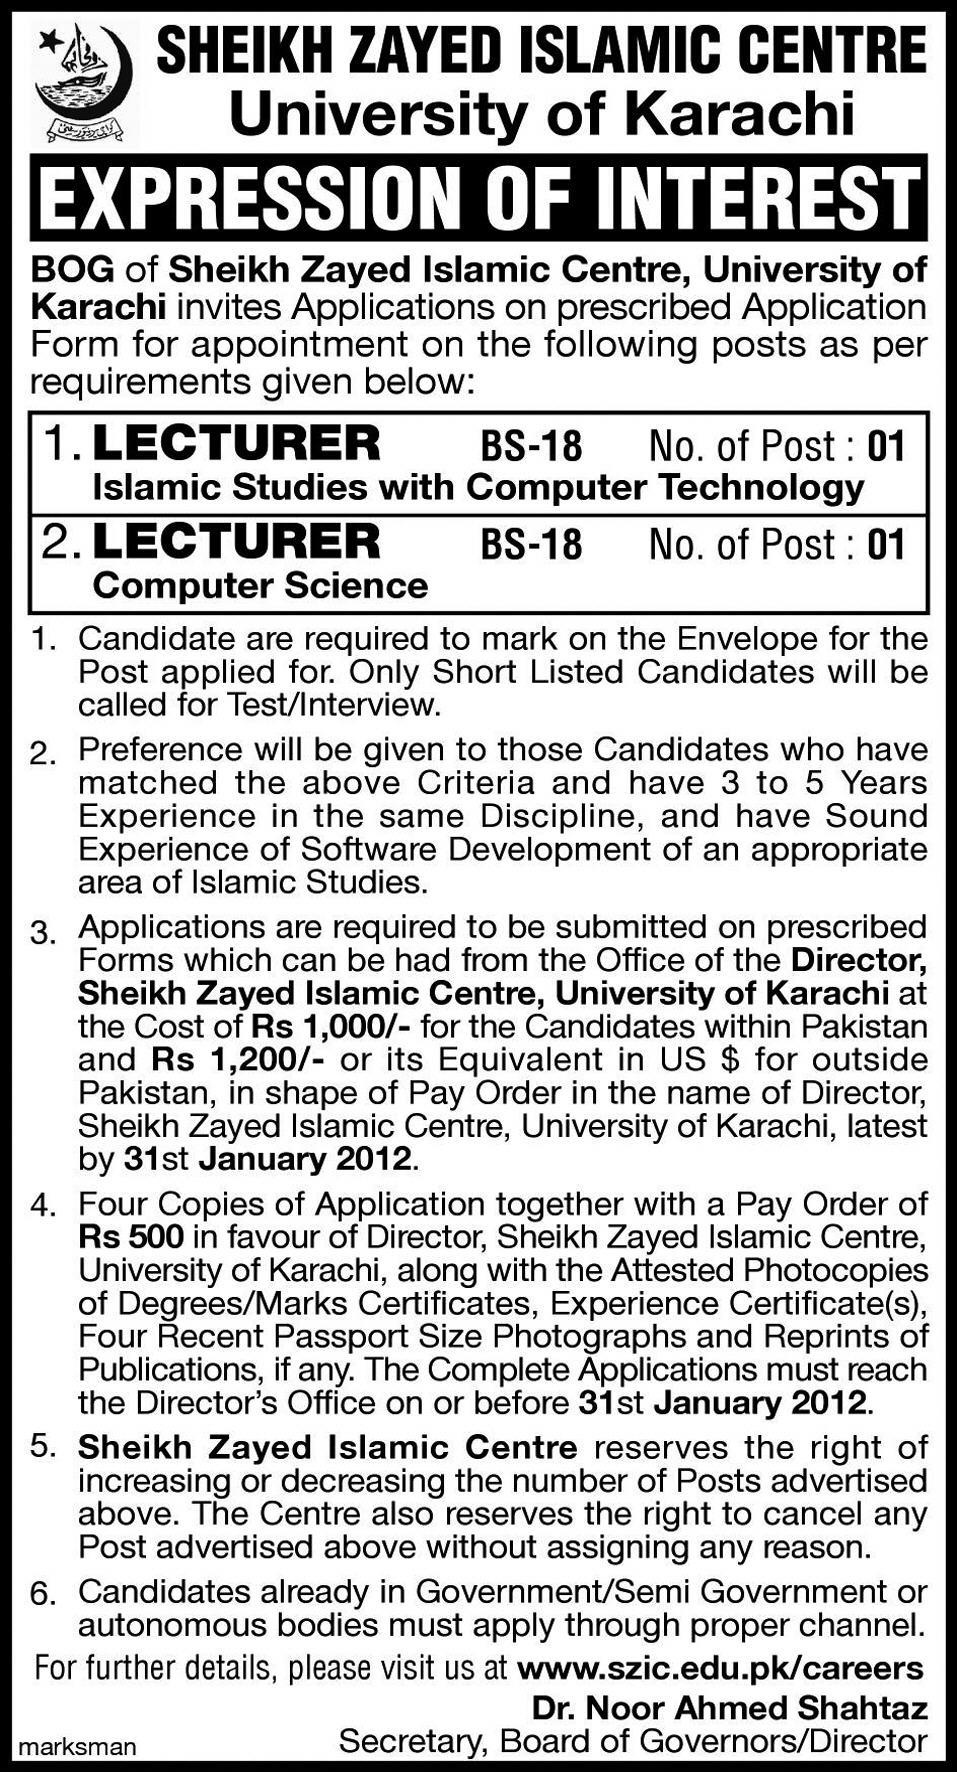 Sheikh Zayed Islamic Centre, University of Karachi Required Lecturers